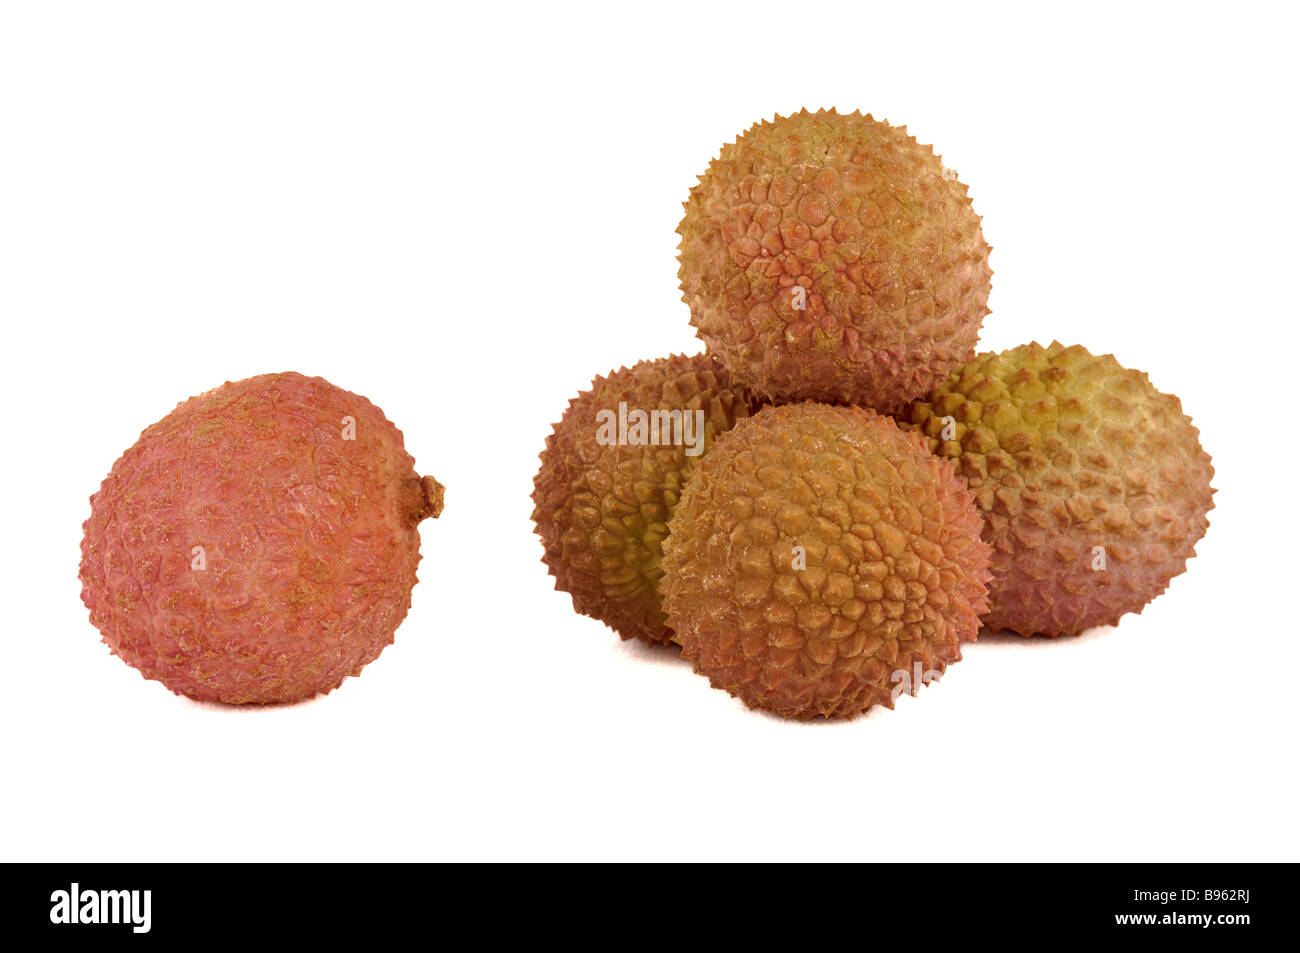 Group of ripe litchi fruits Stock Photo